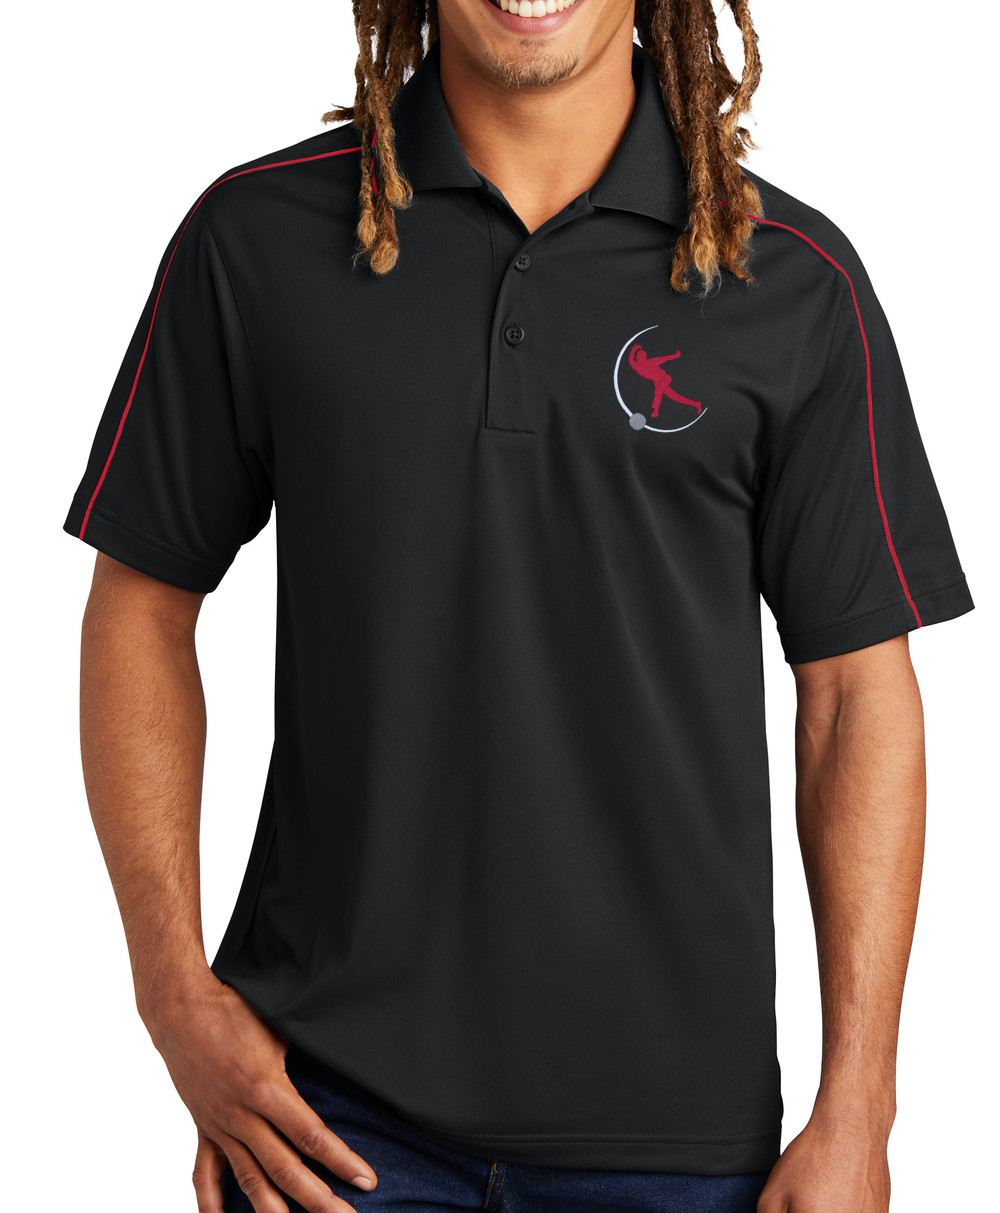 Track Men's Synergy Performance Polo Bowling Shirt Dri-Fit Black Red 